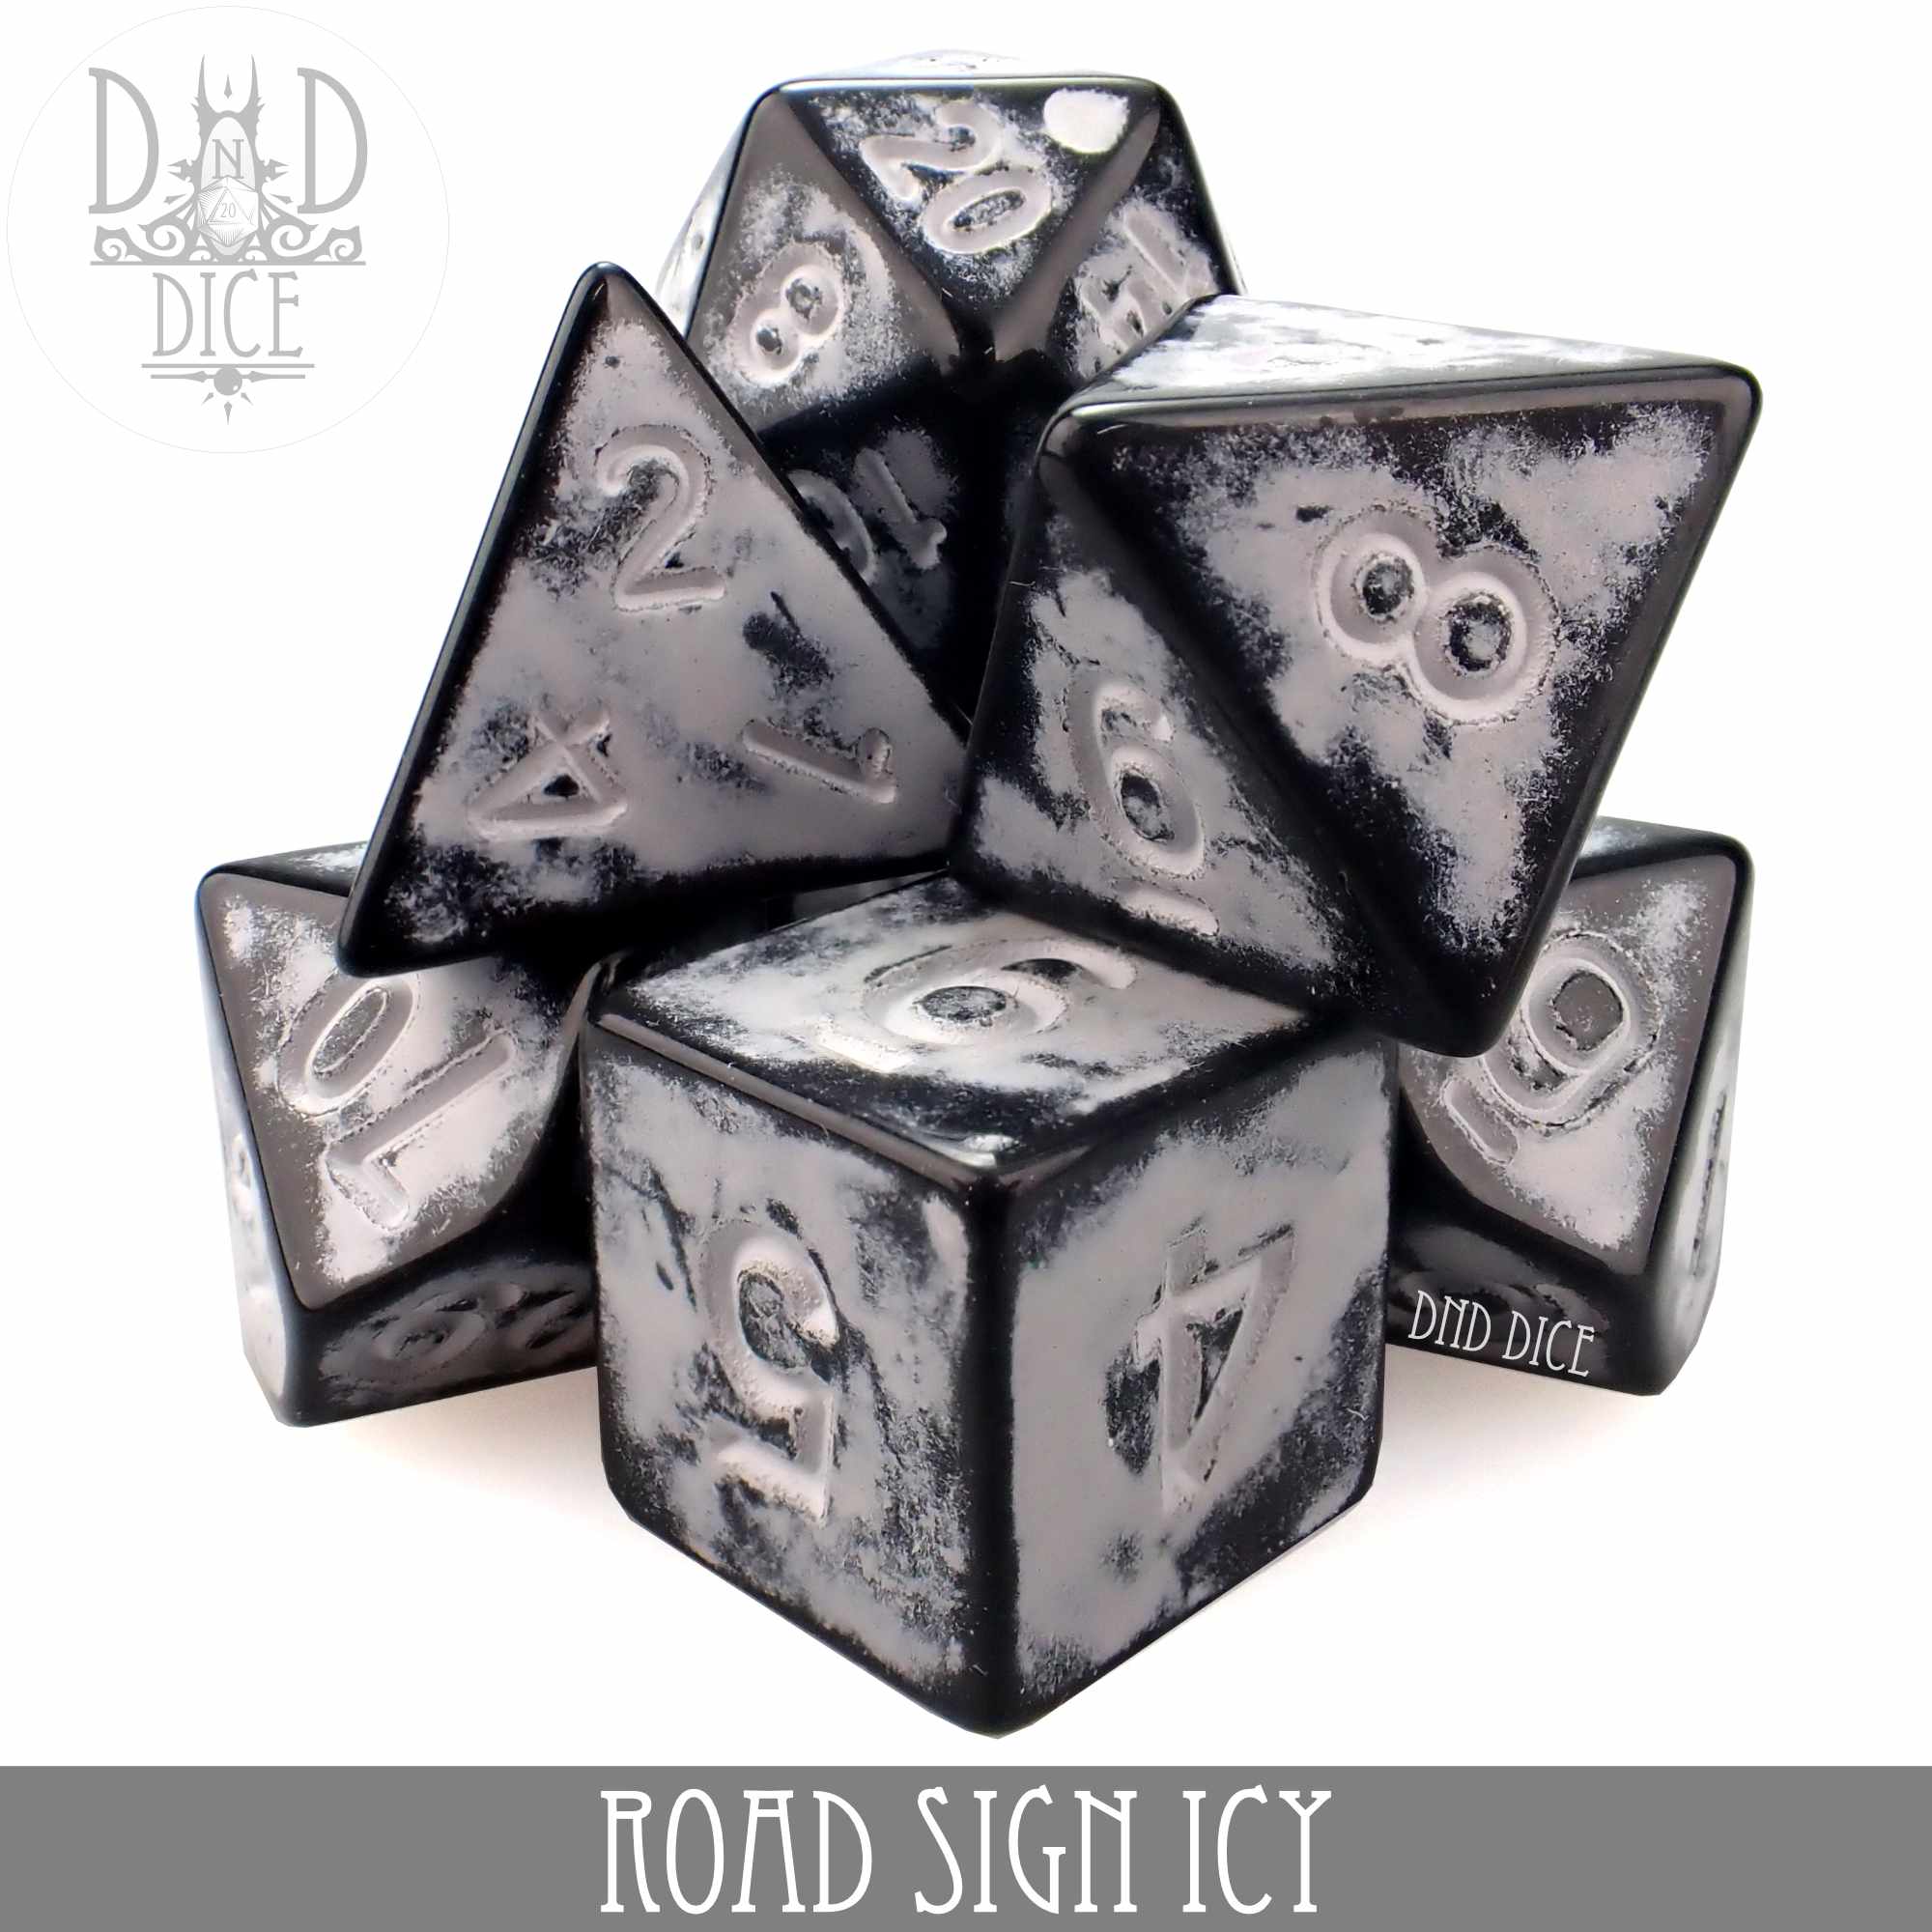 Road Sign Icy Dice Set